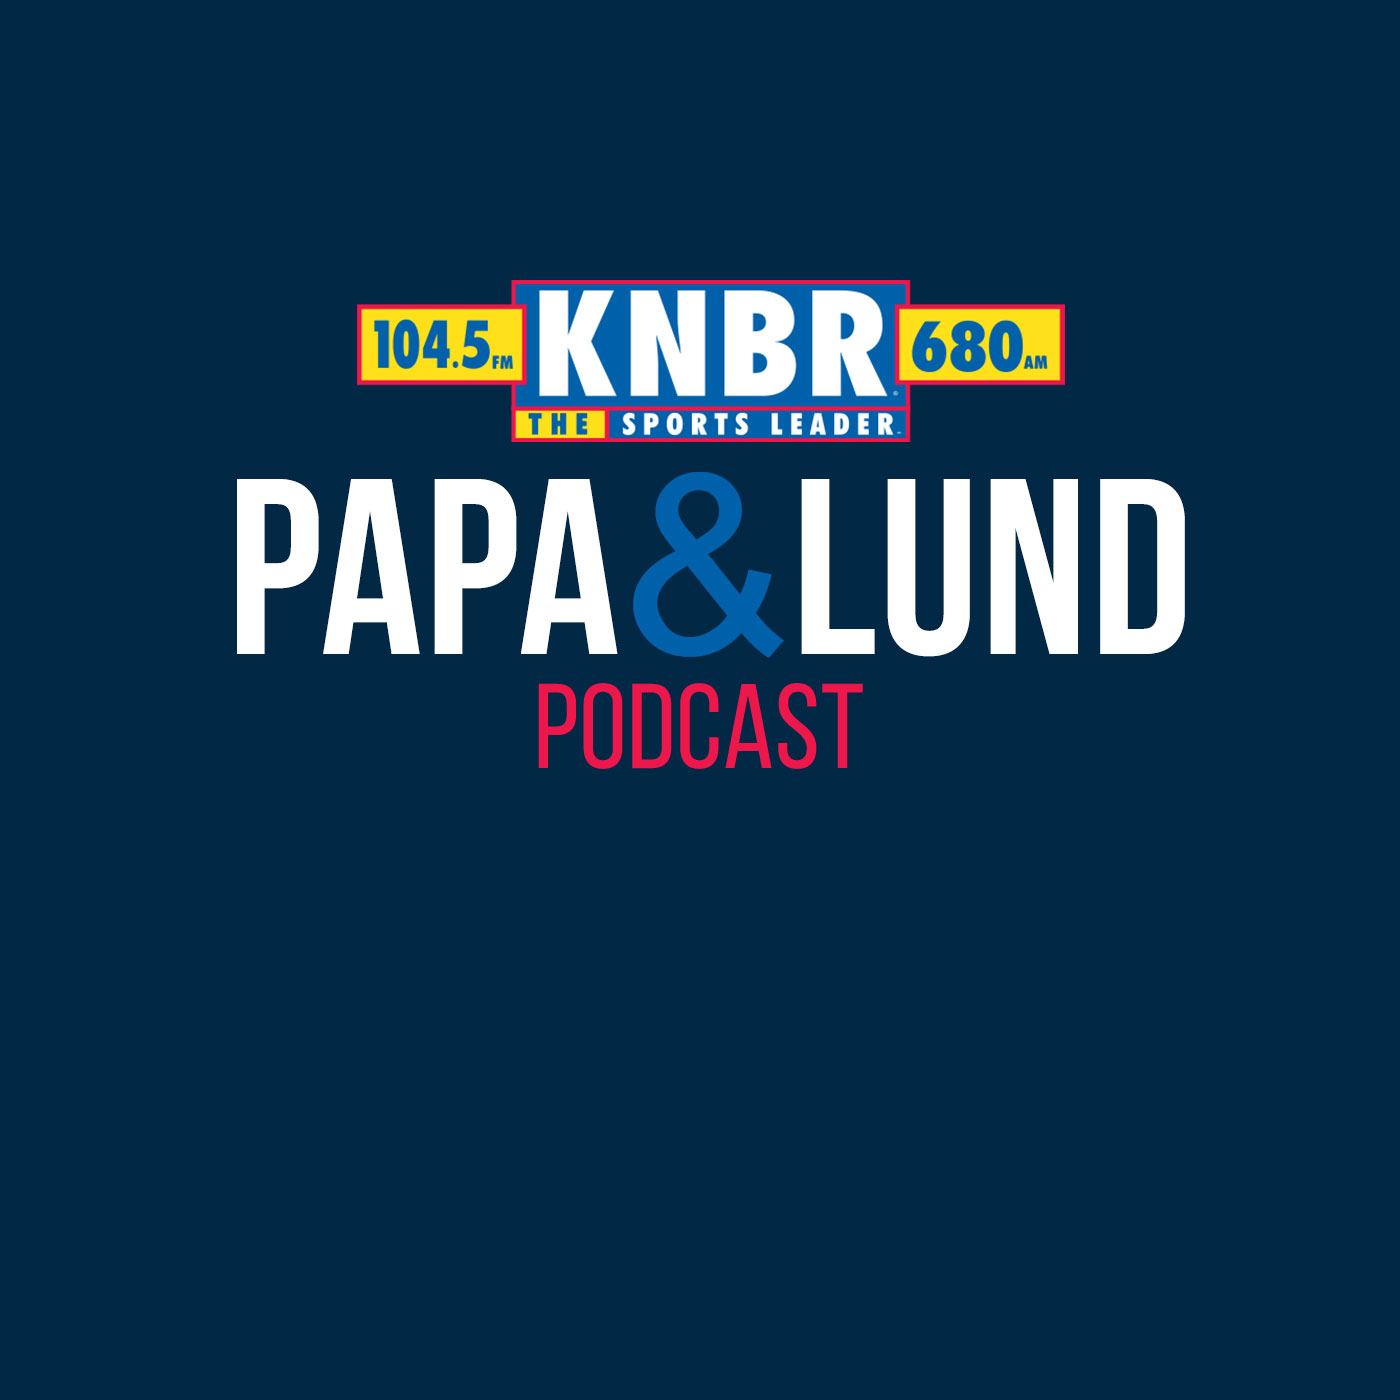 4-8 Papa & Lund Show - Hour 3 - Papa & Lund discuss the final stretch of the season and how it may effect the playoff seeding as well as how the Warriors could look beyond this year with Klay's price tag, likely climbing with his strong close to the season